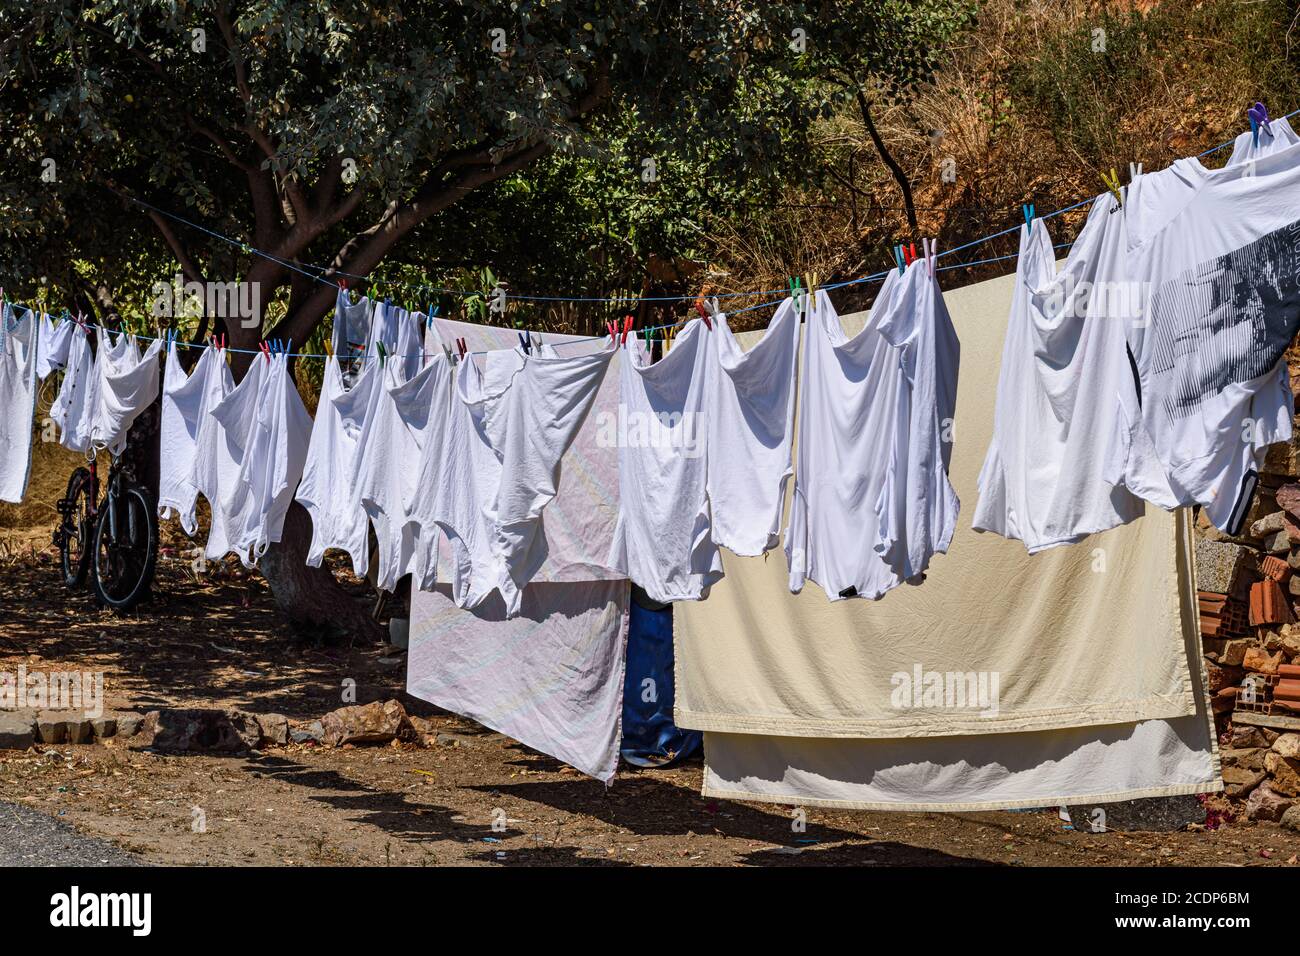 Outdoor clothes drying solution on a sunny day on Craiyon